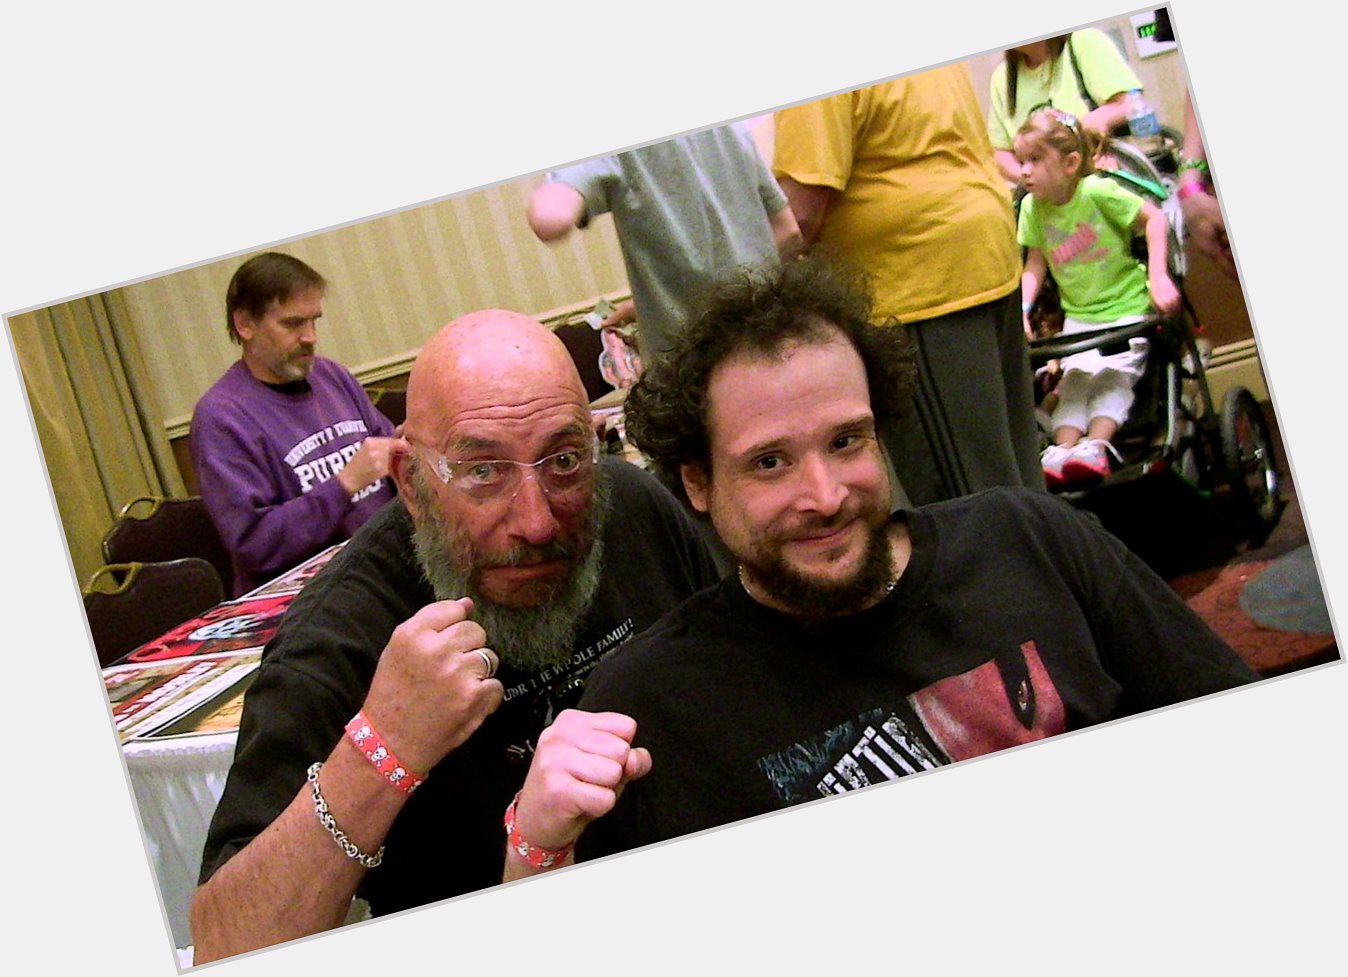 Sid Haig was the man. I miss seeing him every year at MMP. Happy Birthday to him! I wish he was still around. RIP 